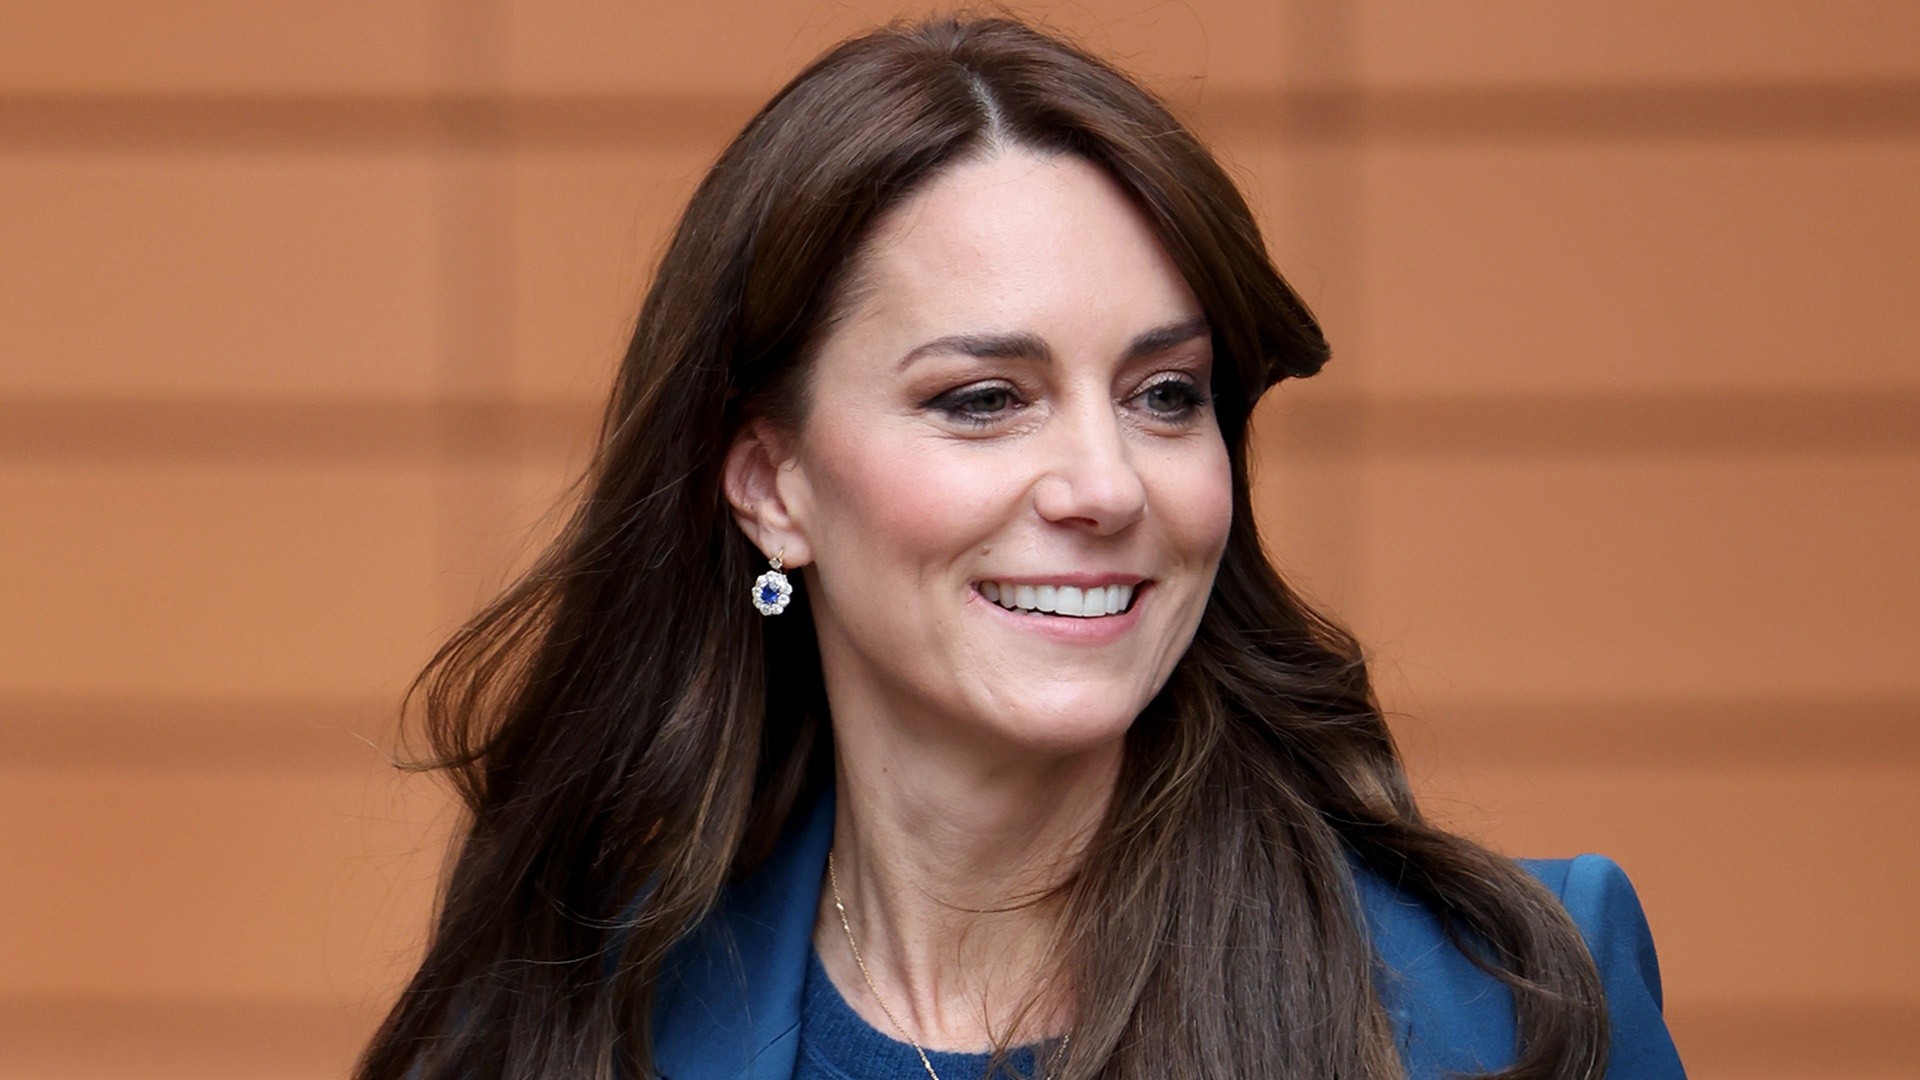 Kate Middleton seen in public for the first time in months